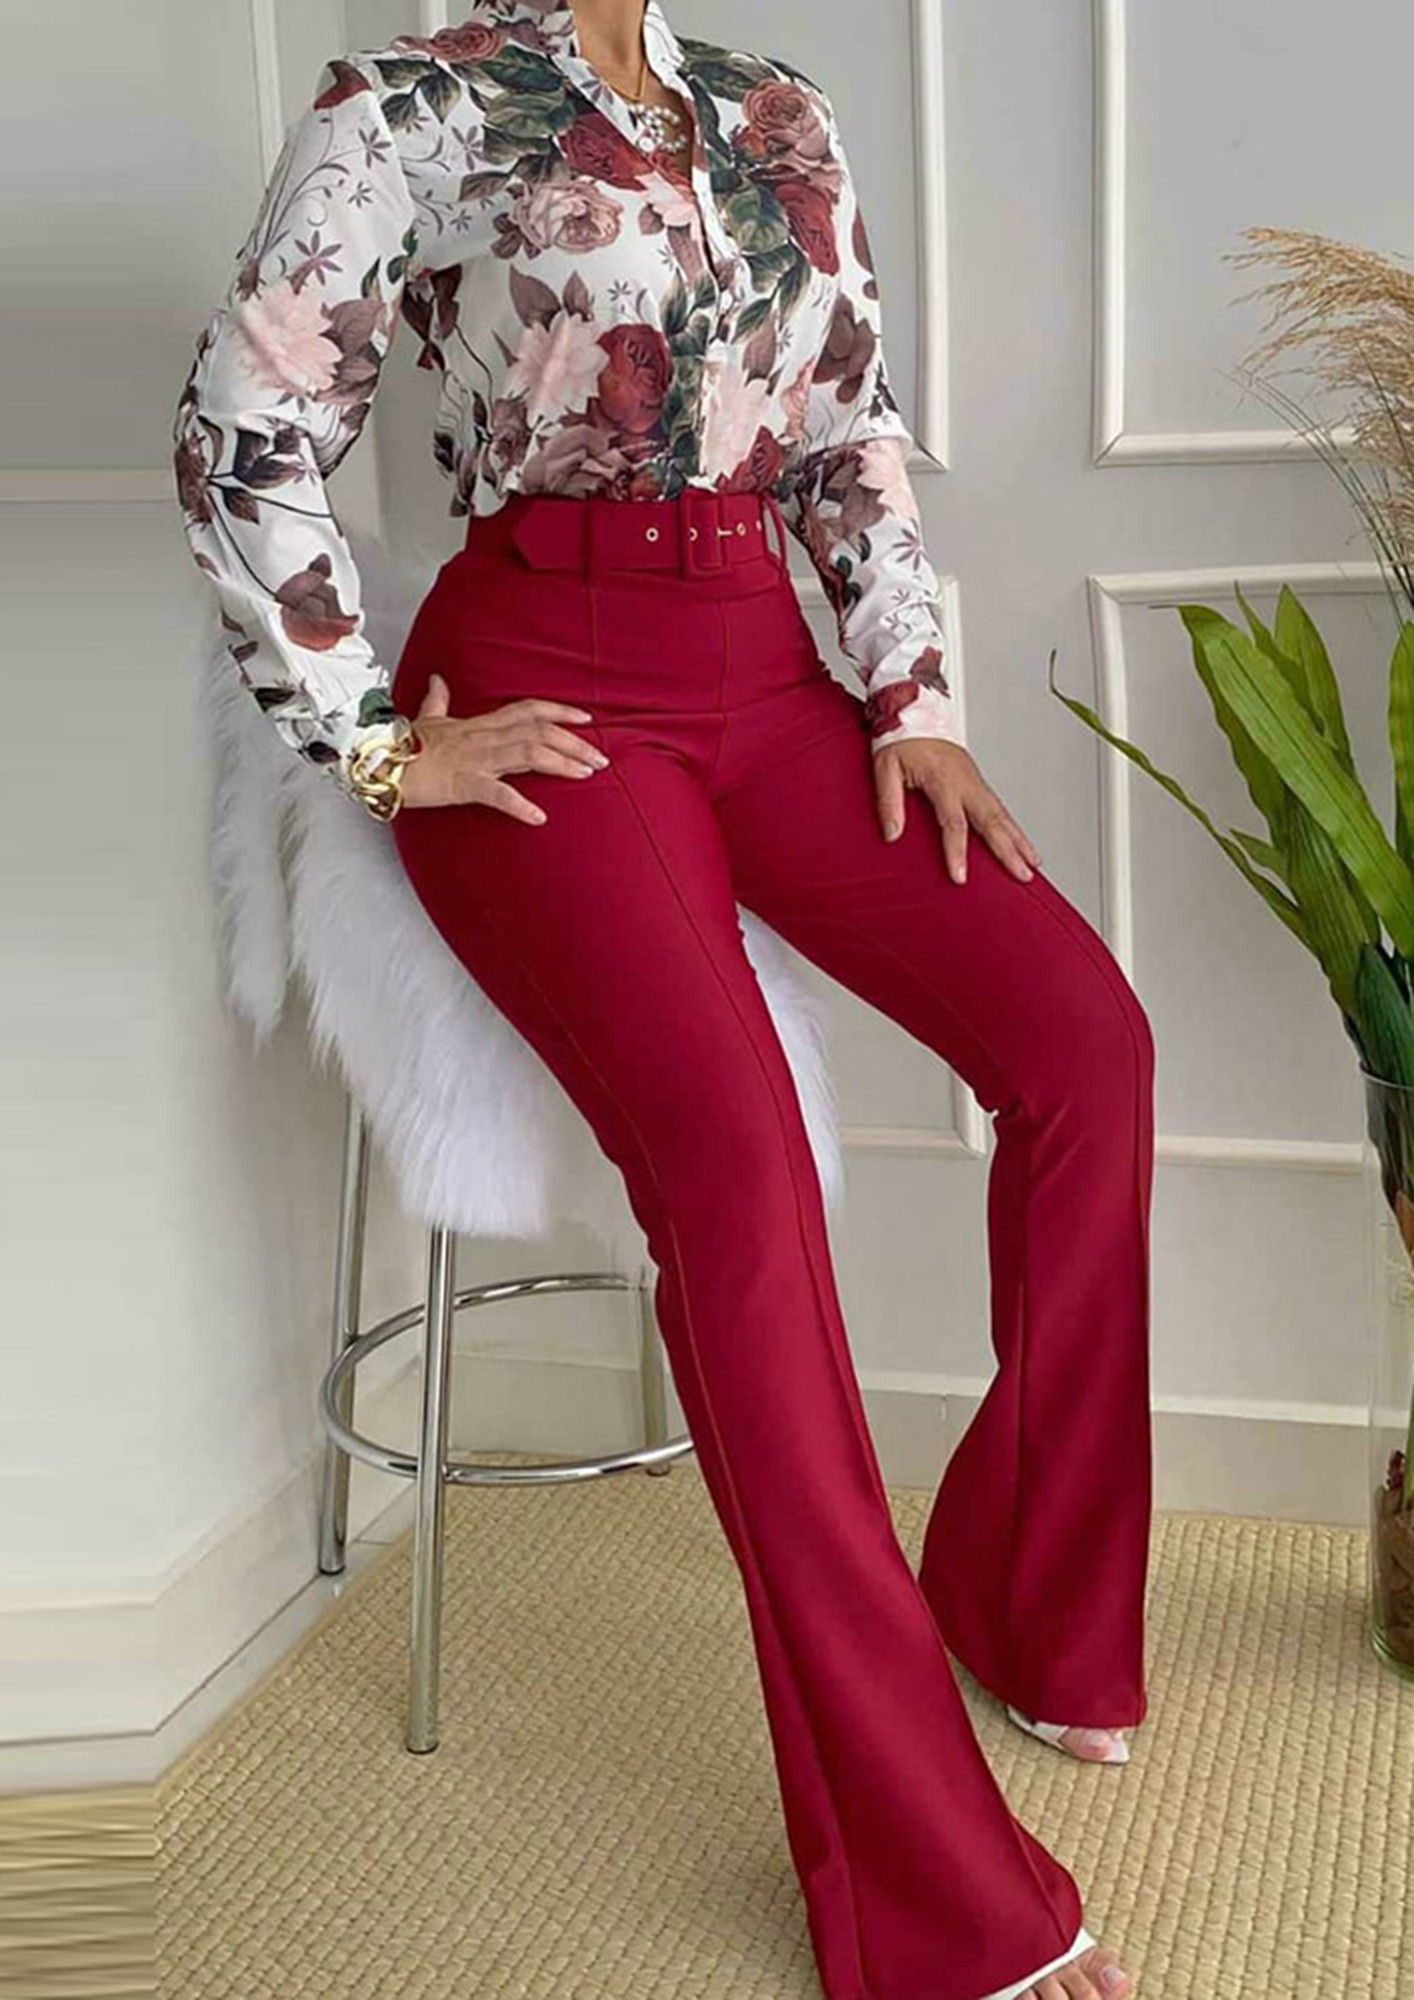 20 Pantsuits for Women in 2021  Where To Buy and Price of Pant Suit